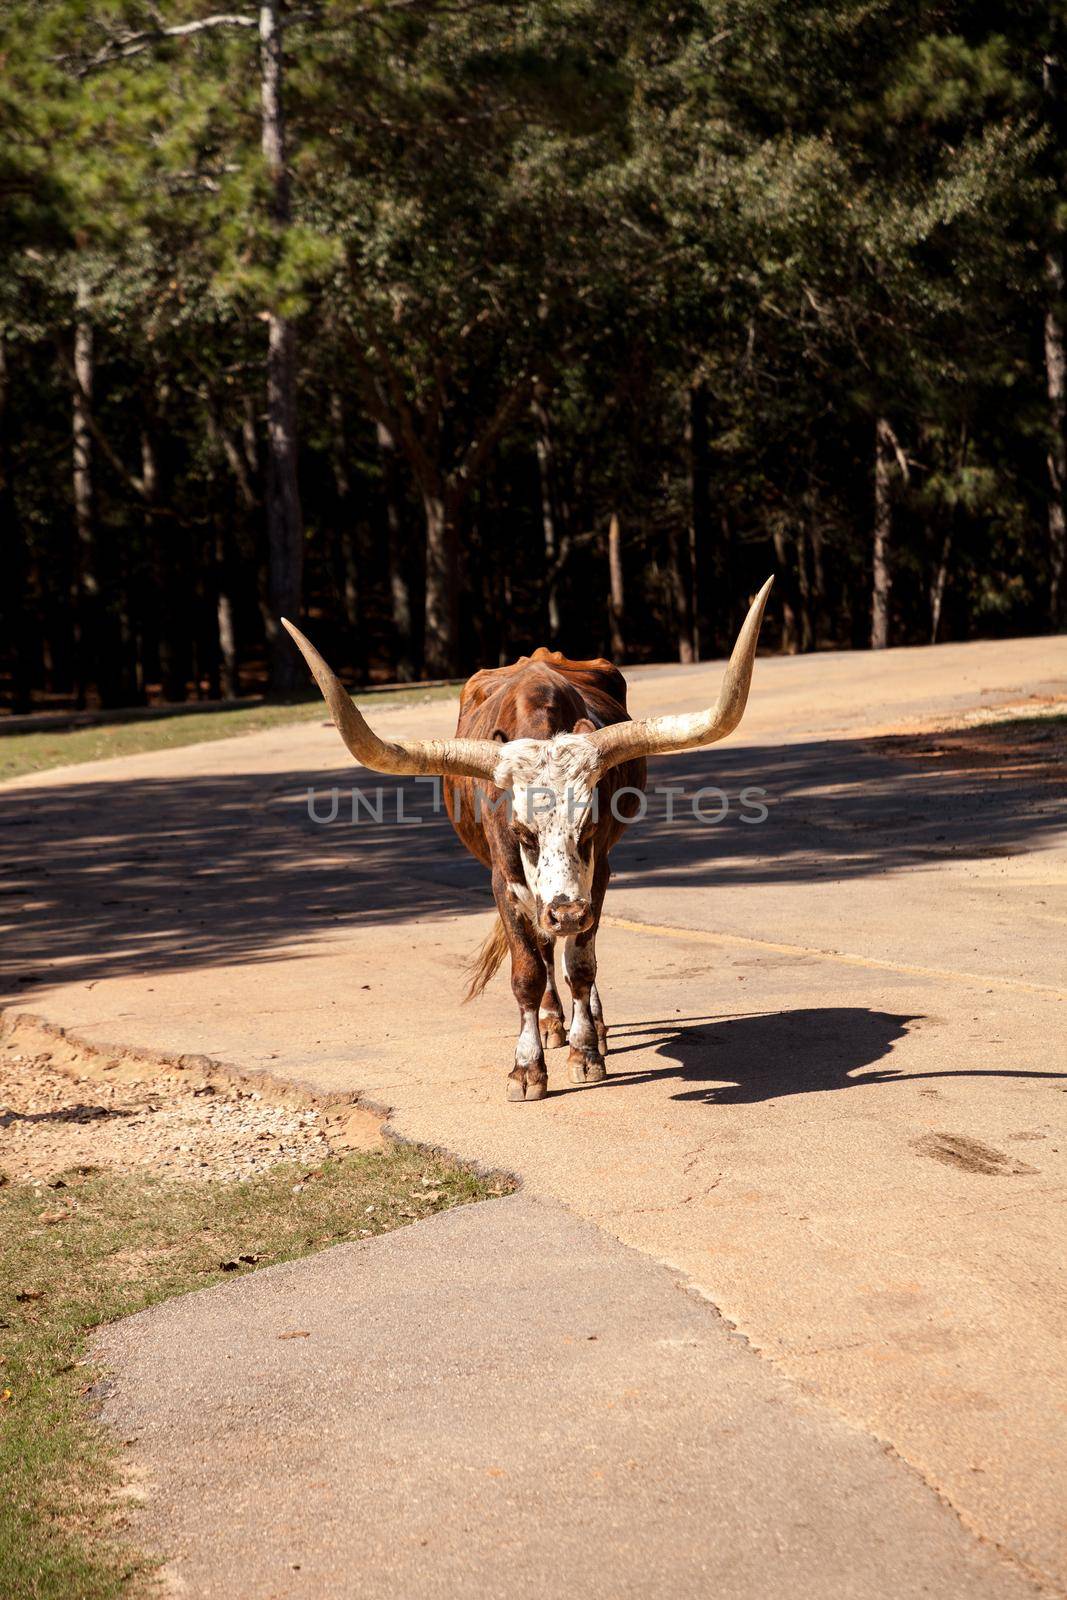 Texas longhorn cattle Bos taurus taurus with very large horns.